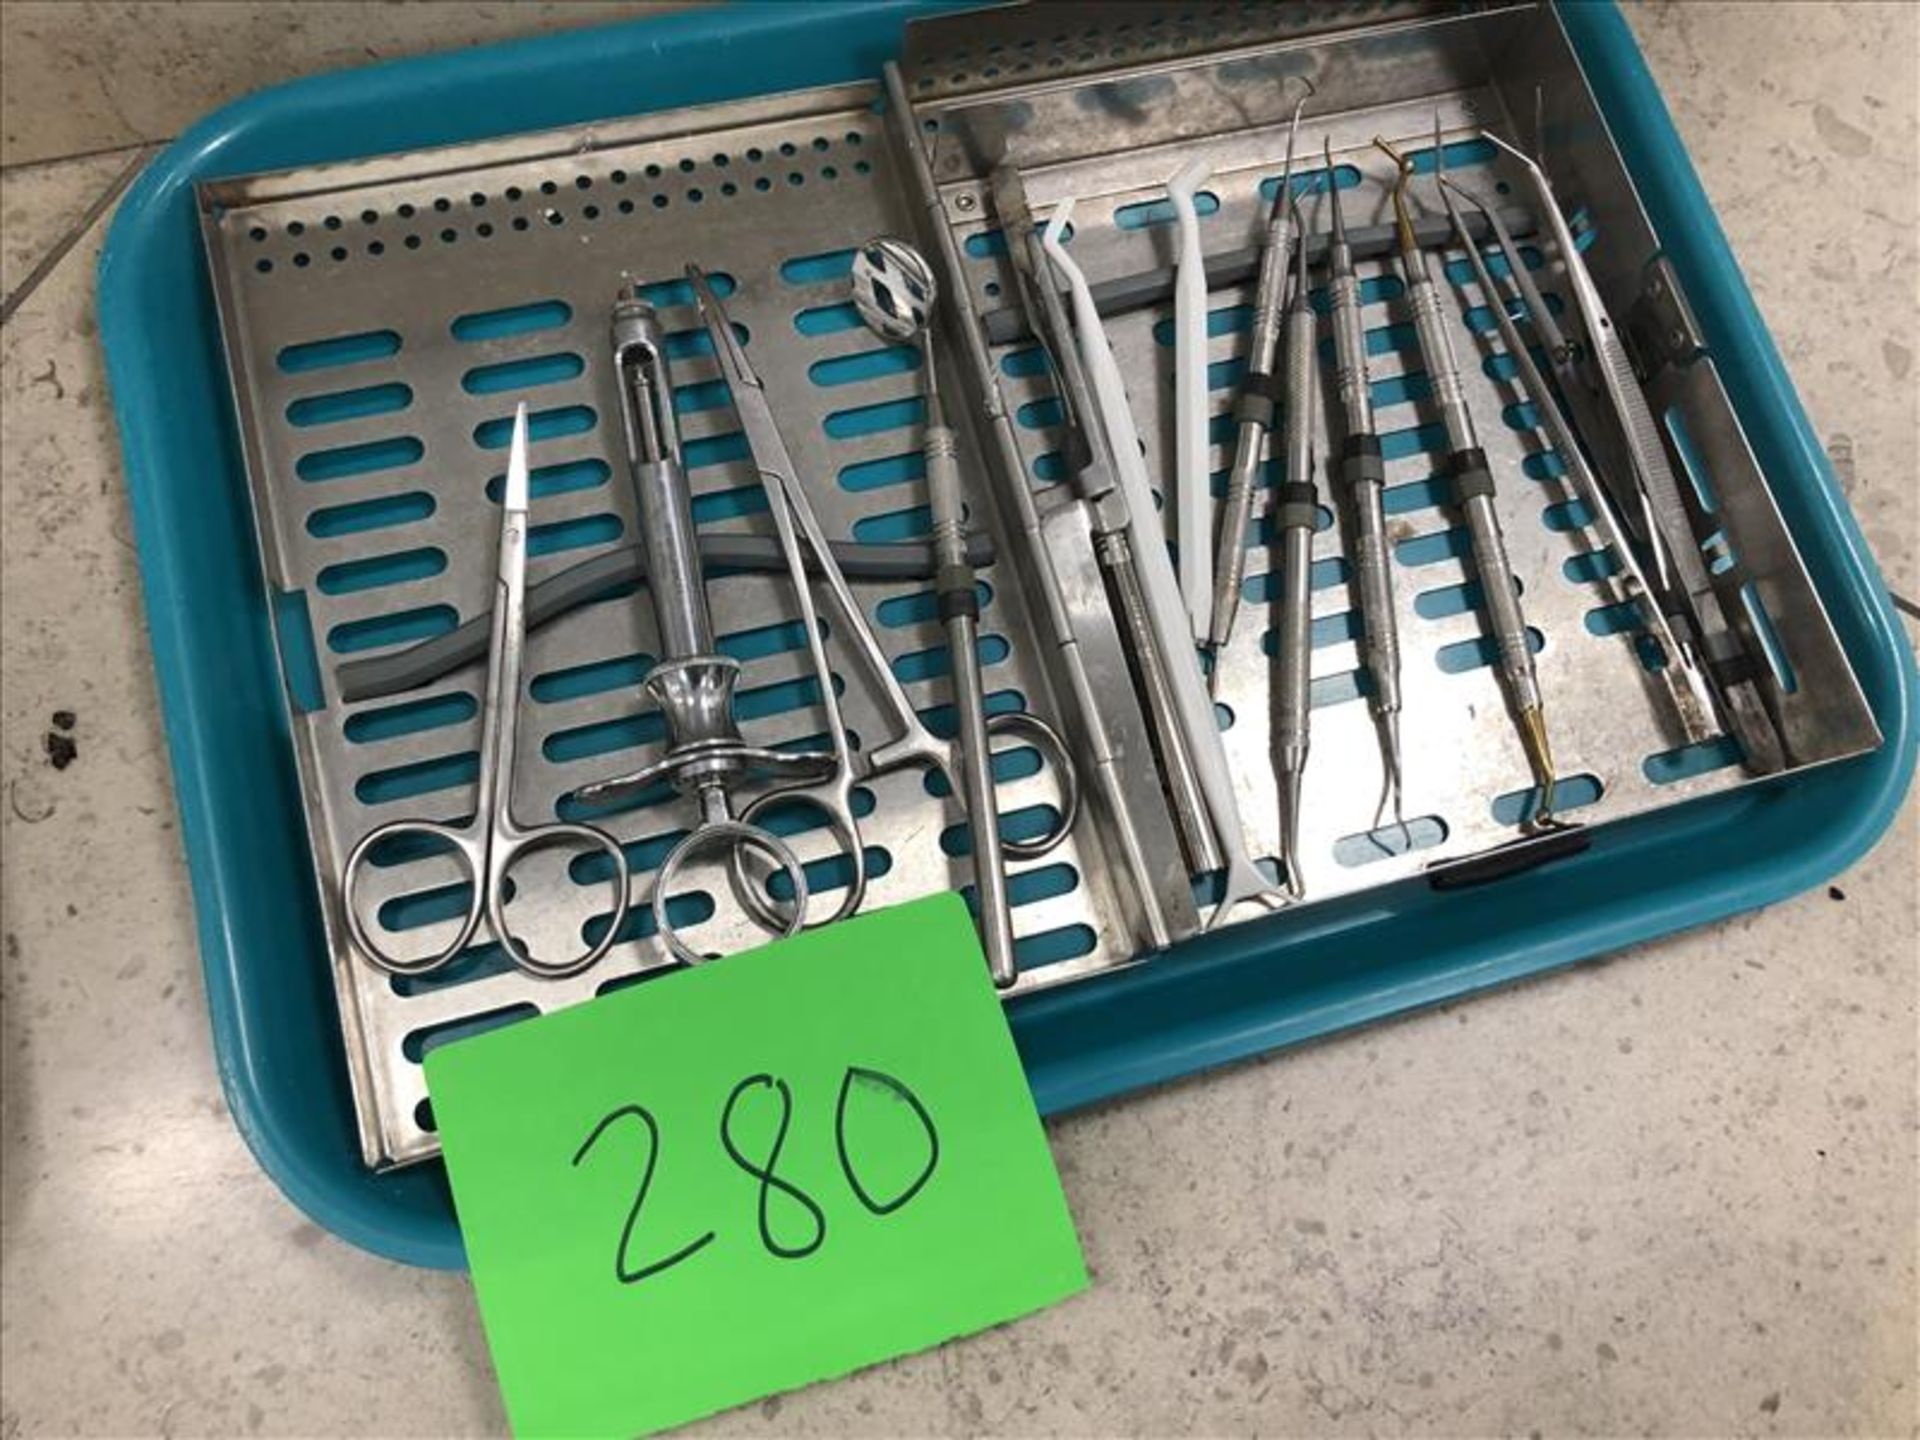 Set of dental operatory instruments in stainless instrument cassette case - Image 2 of 3